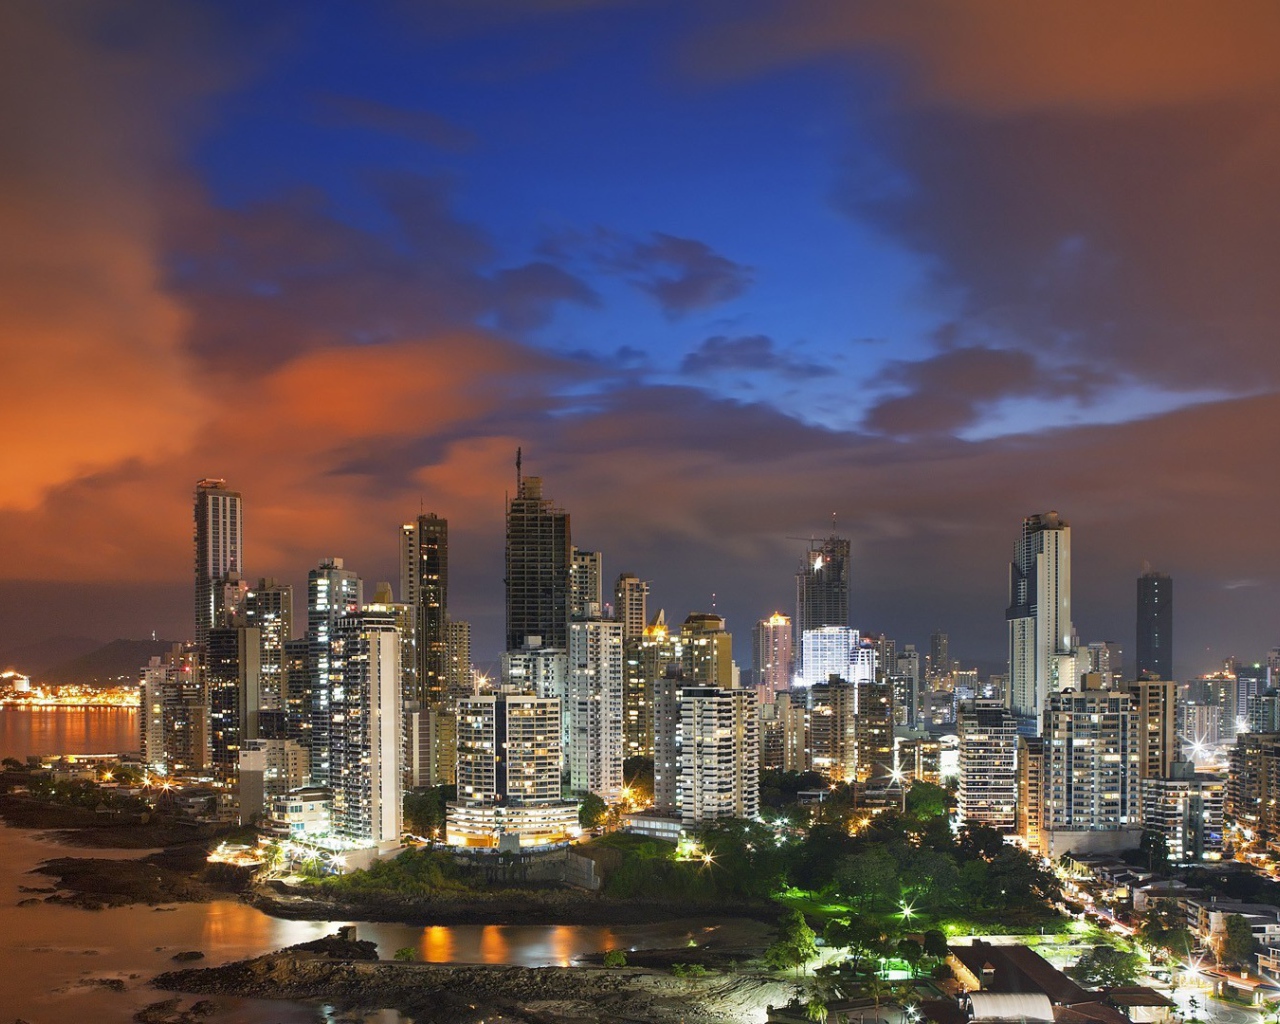 City of Panama in the evening